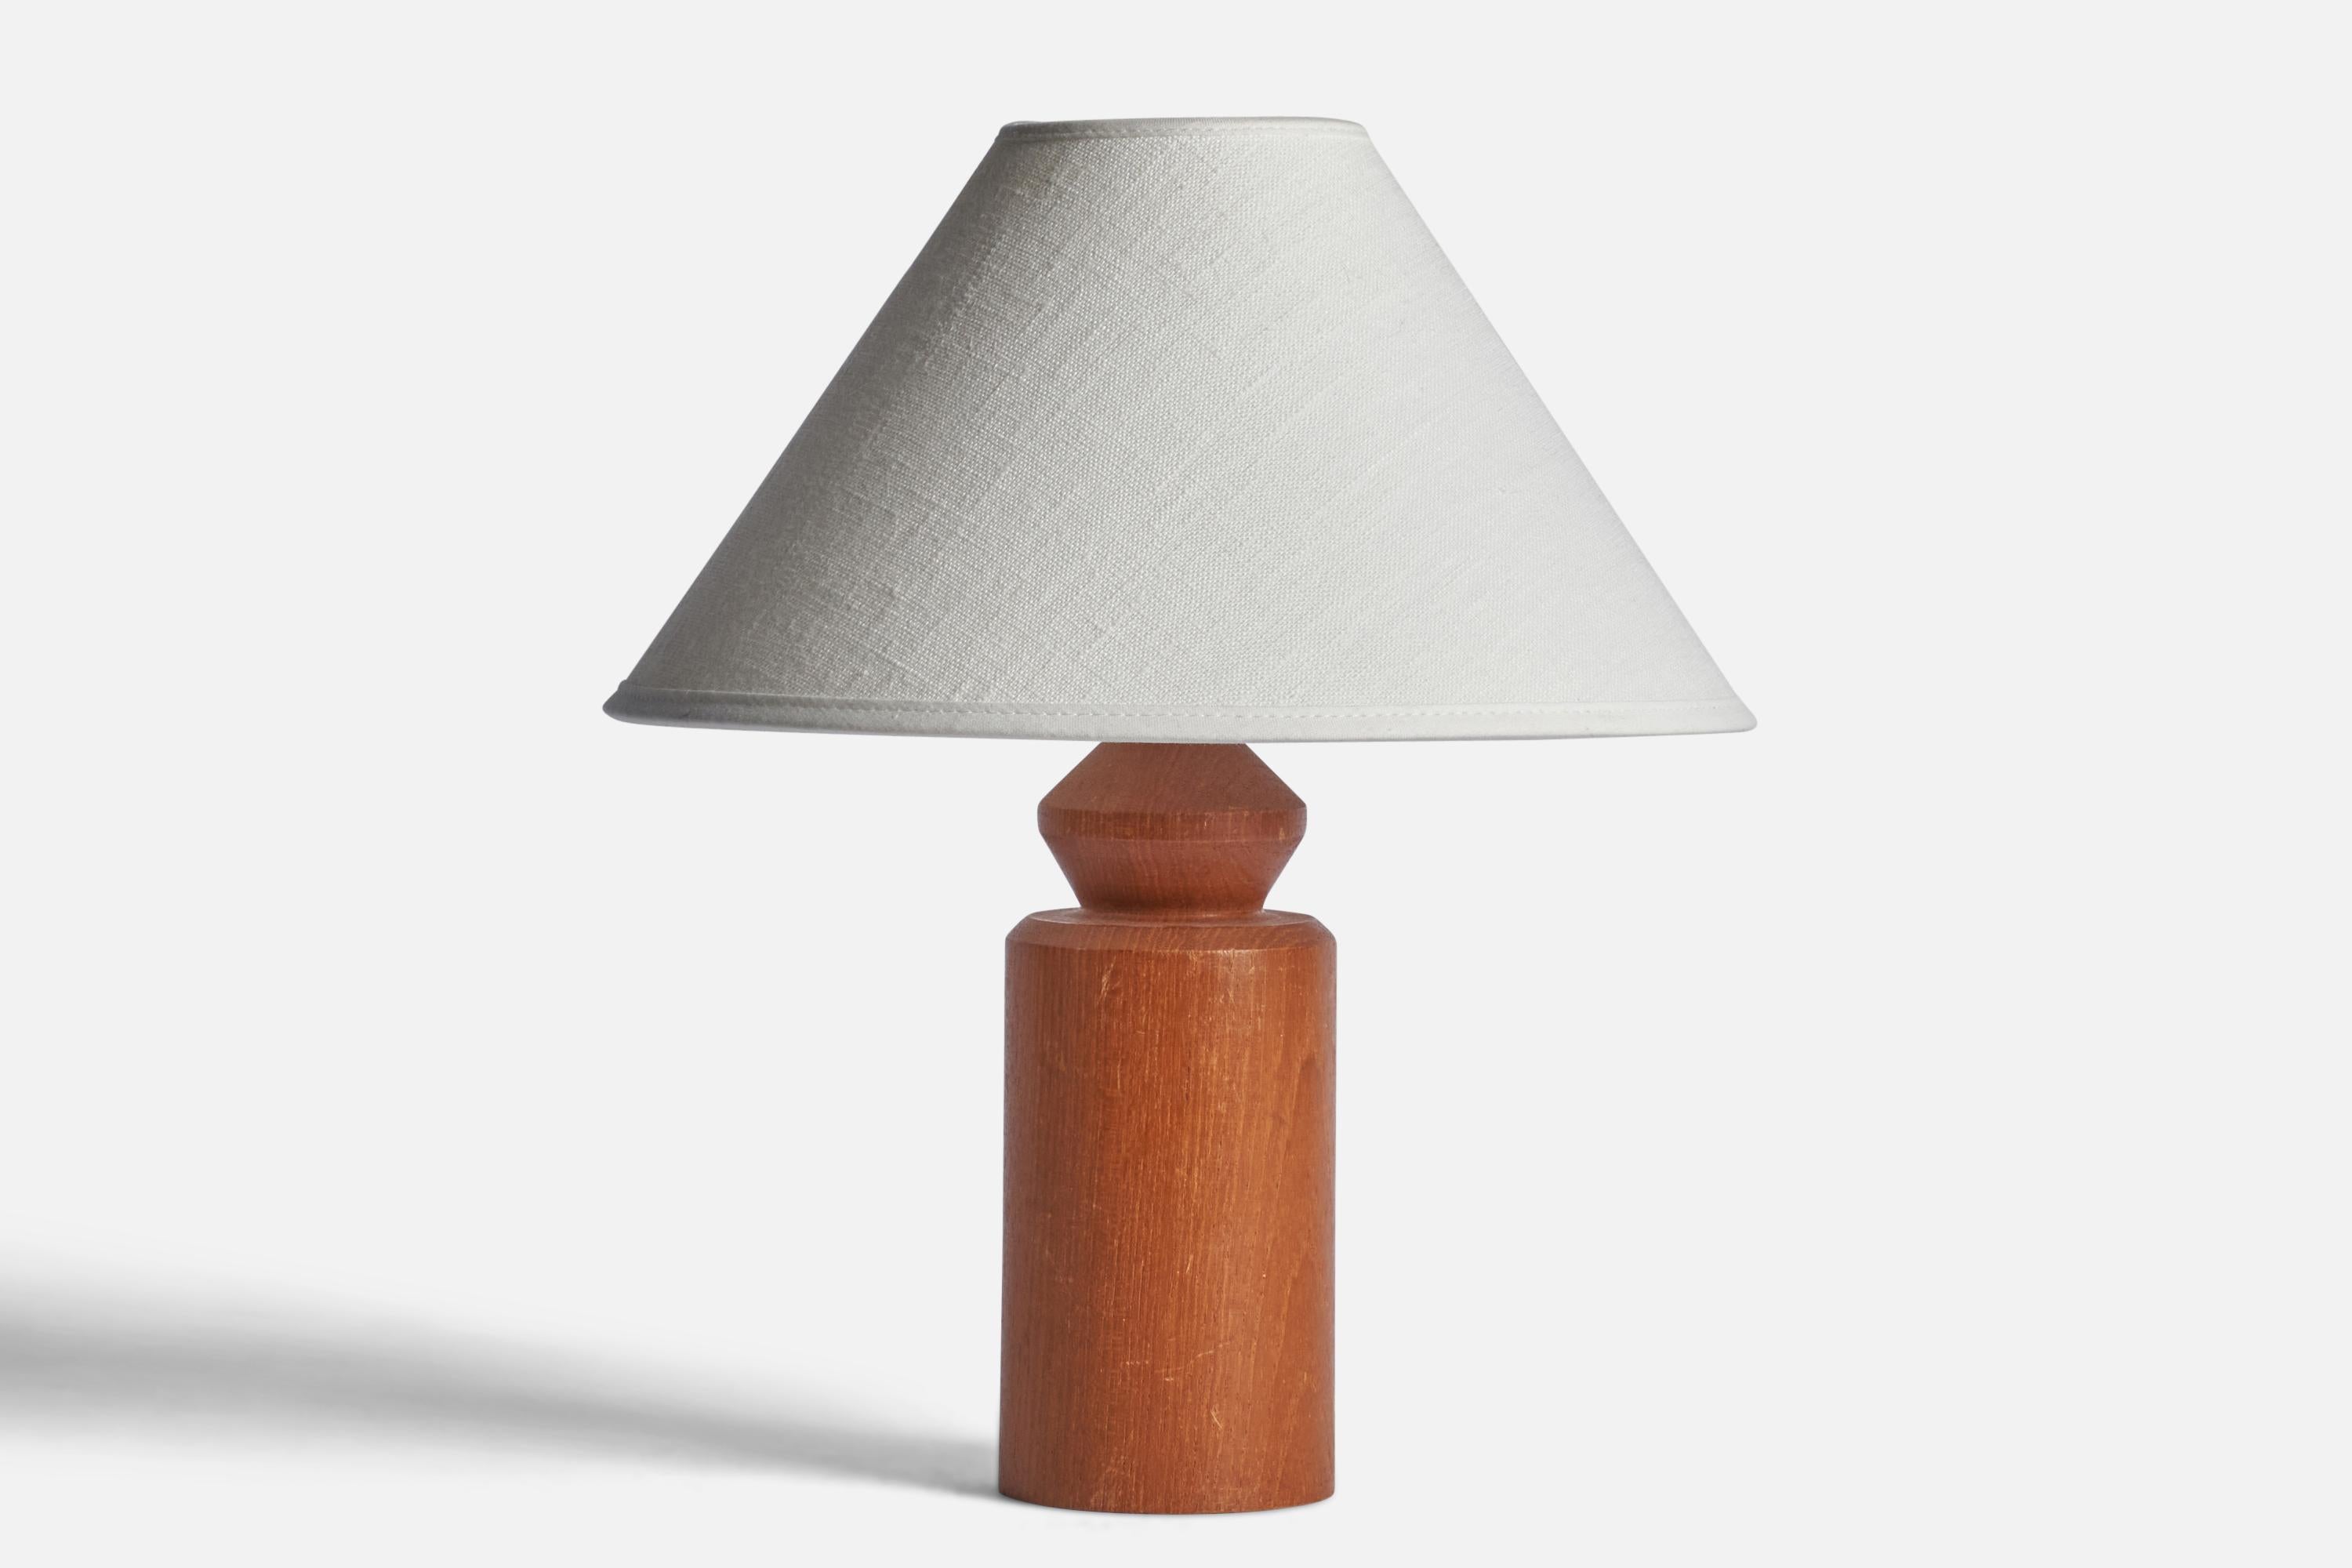 An oak table lamp designed and produced in Sweden, c. 1960s.

Dimensions of Lamp (inches): 9.15” H x 3” Diameter
Dimensions of Shade (inches): 2.5” Top Diameter x 10” Bottom Diameter x 5.5